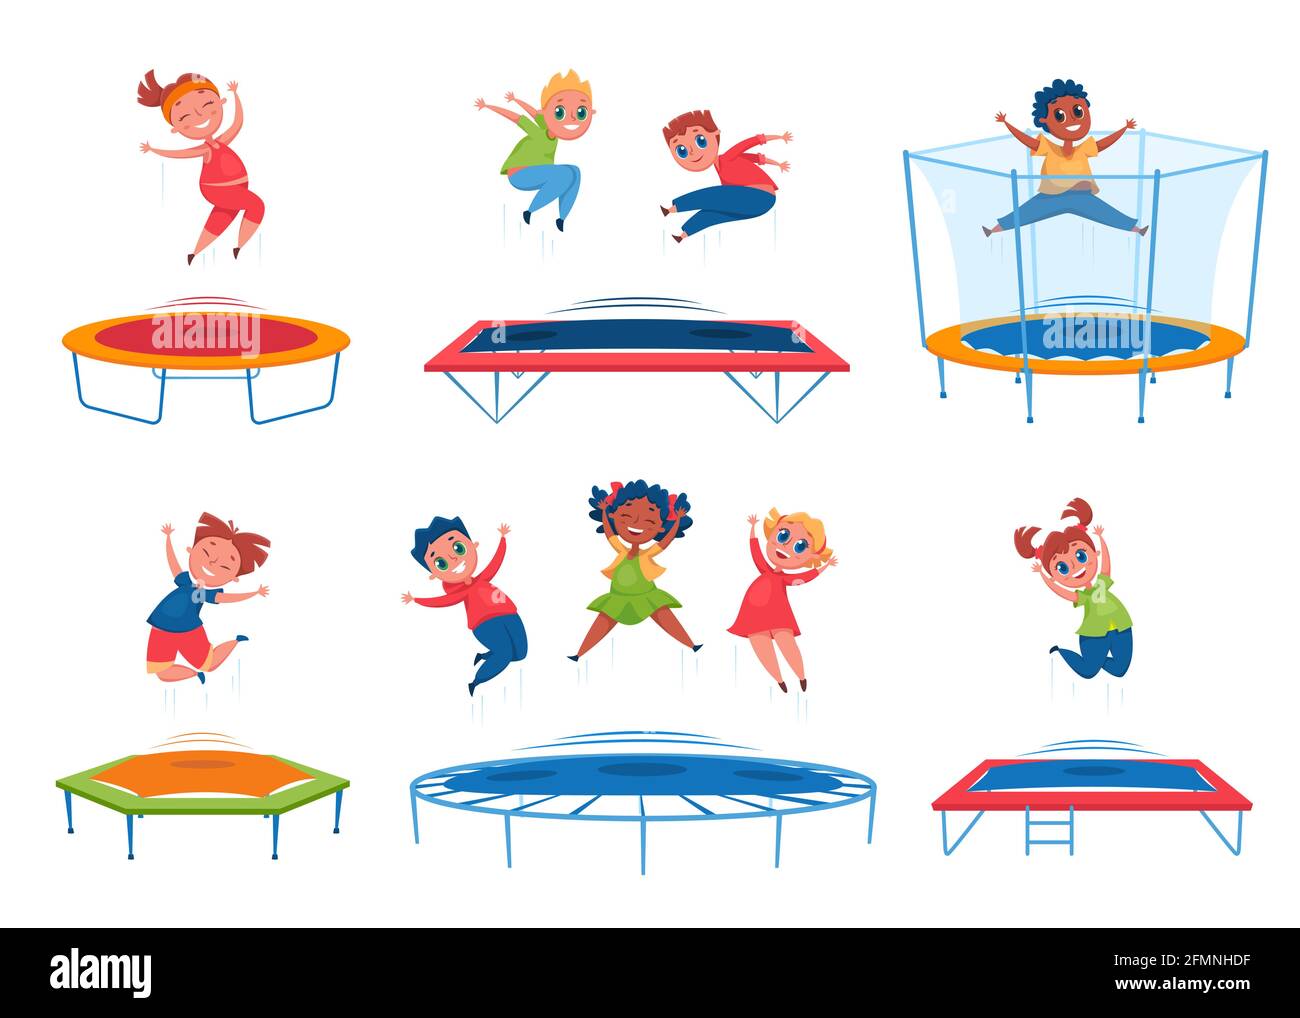 Kids jumping on trampoline. Happy boys, girls bouncing and having fun. Energetic children jump together. Group outdoor activity cartoon vector set. Characters having leisure time and entertainment Stock Vector